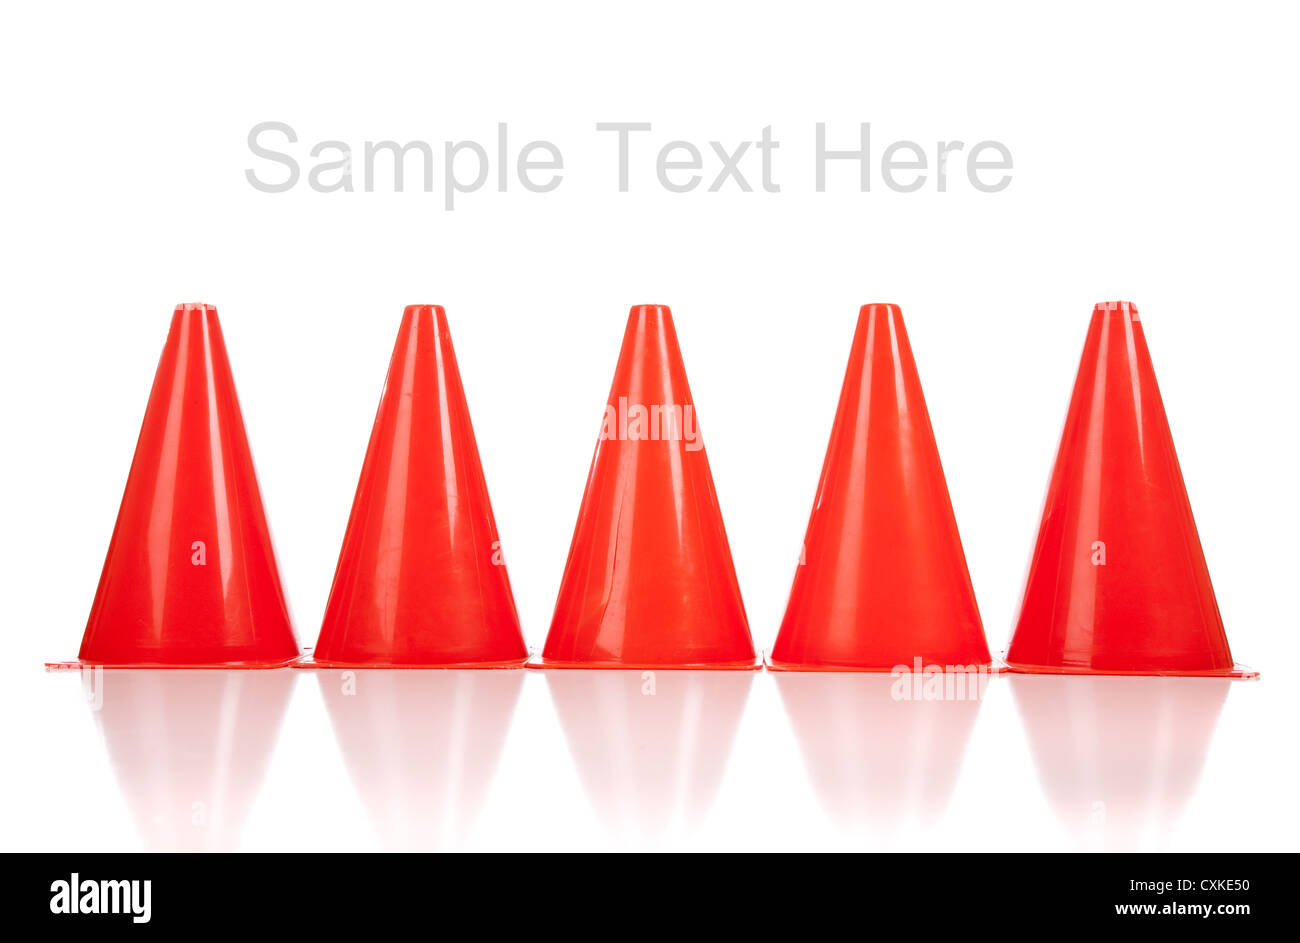 Row of orange safety cones on a white background with copy space Stock Photo